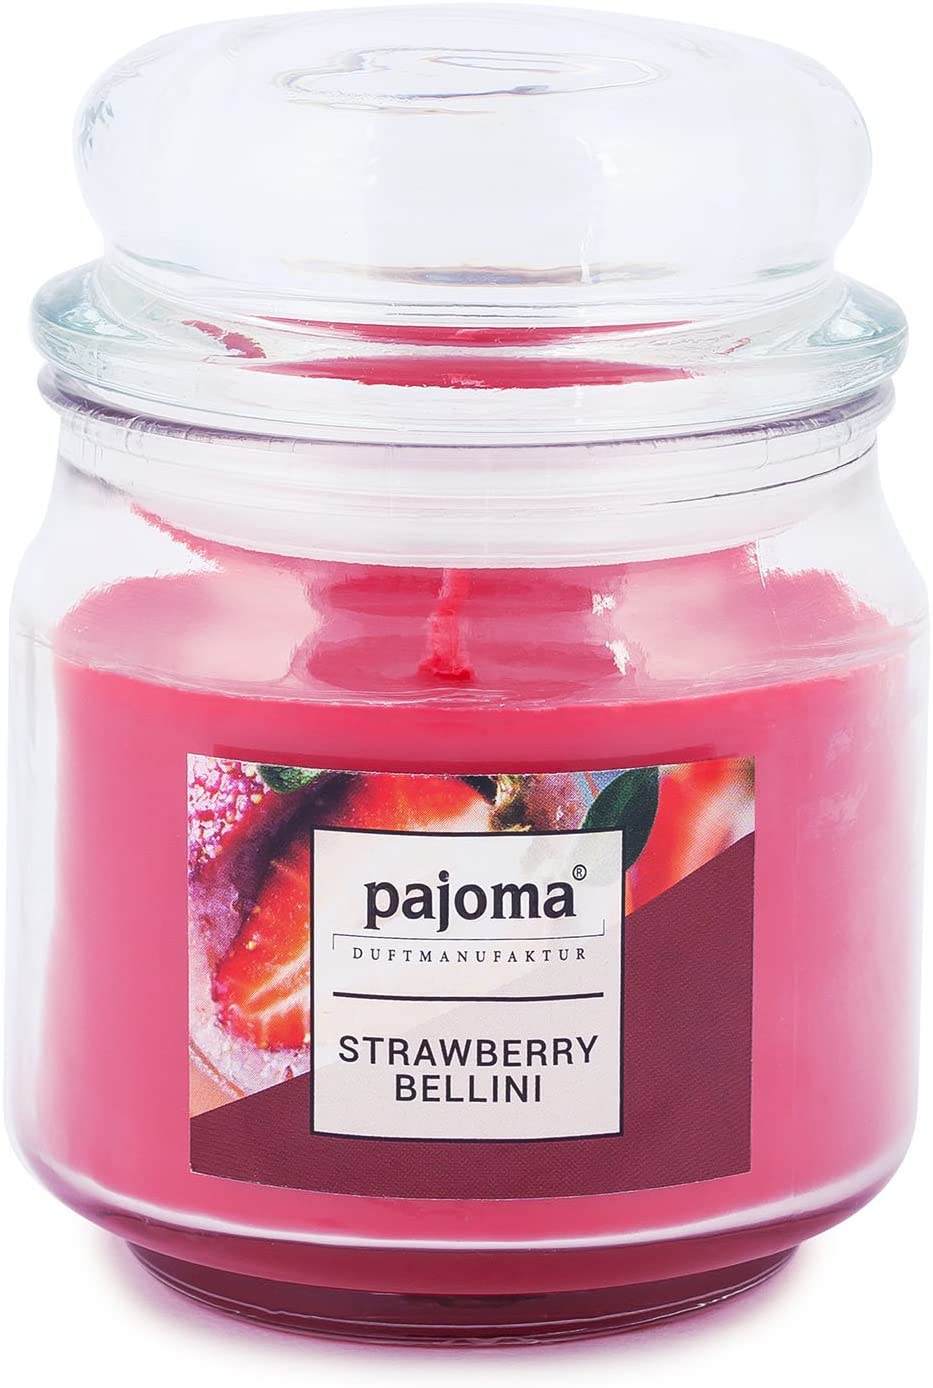 Pajoma Scented Candle "Strawberry Bellini" Sweet Edition In Candy Jar, 248 